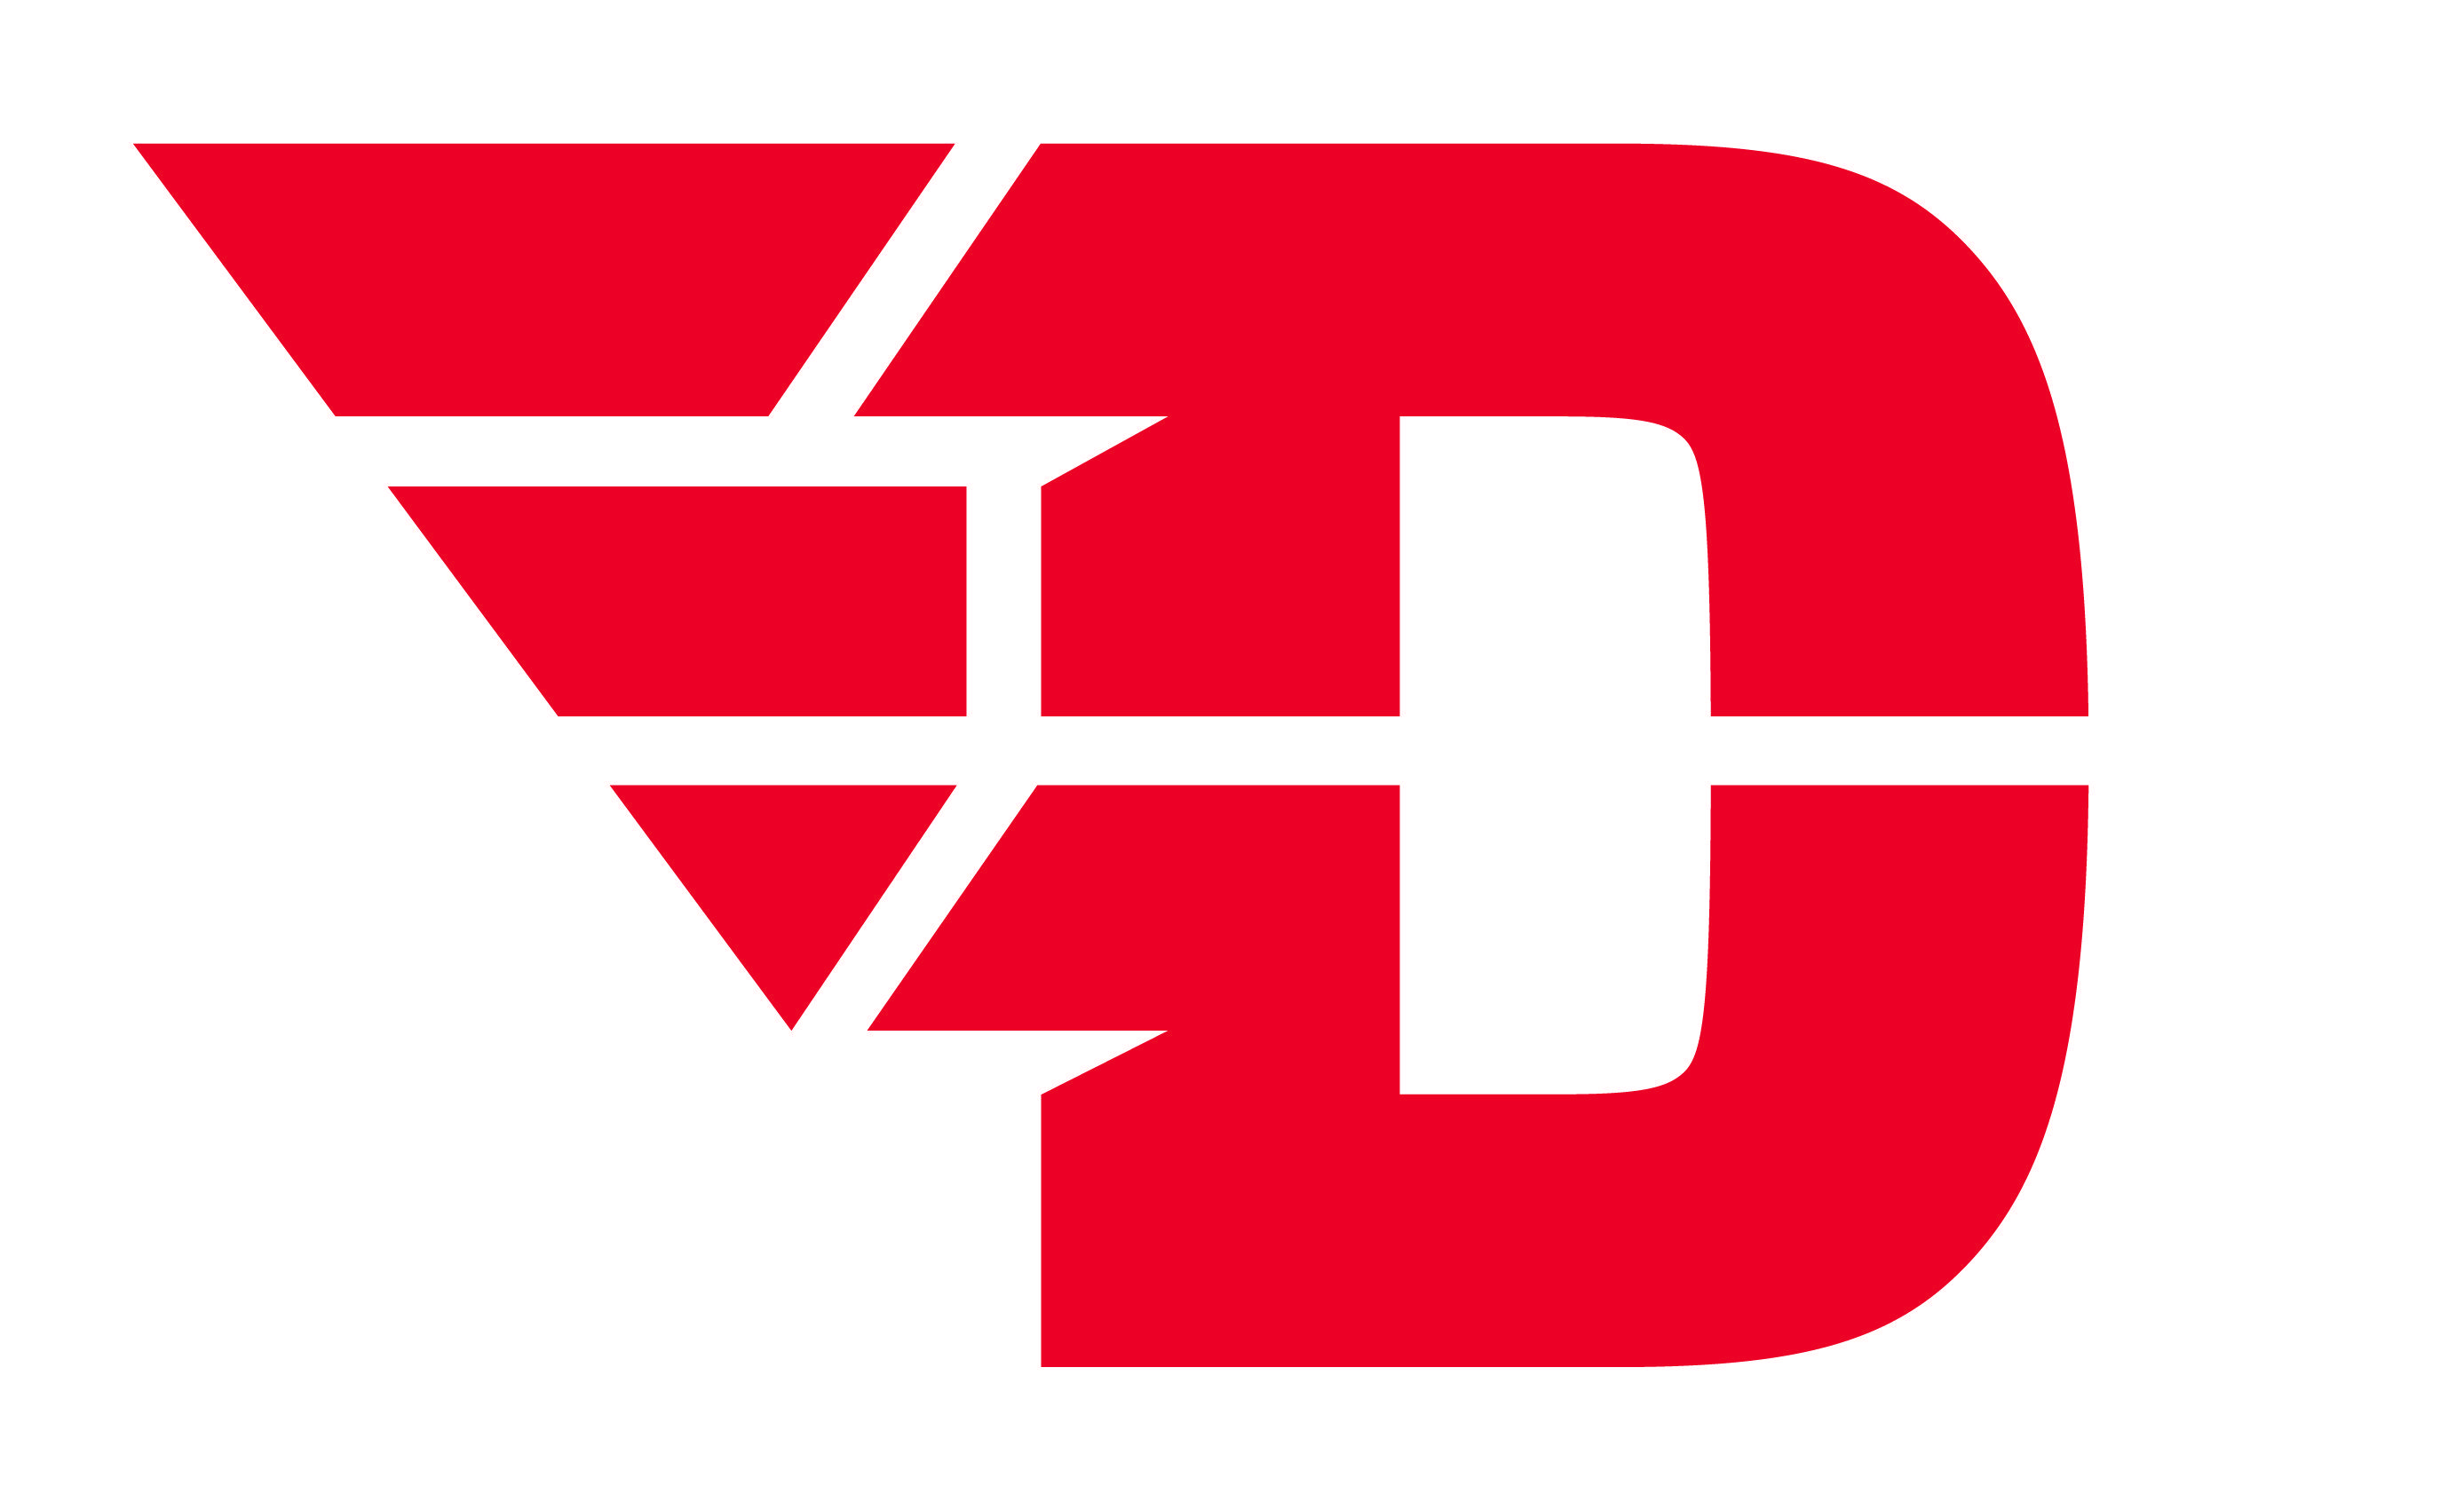 Red D Logo - File:Dayton Flyers Winged-D Logo Red.jpg - Wikimedia Commons